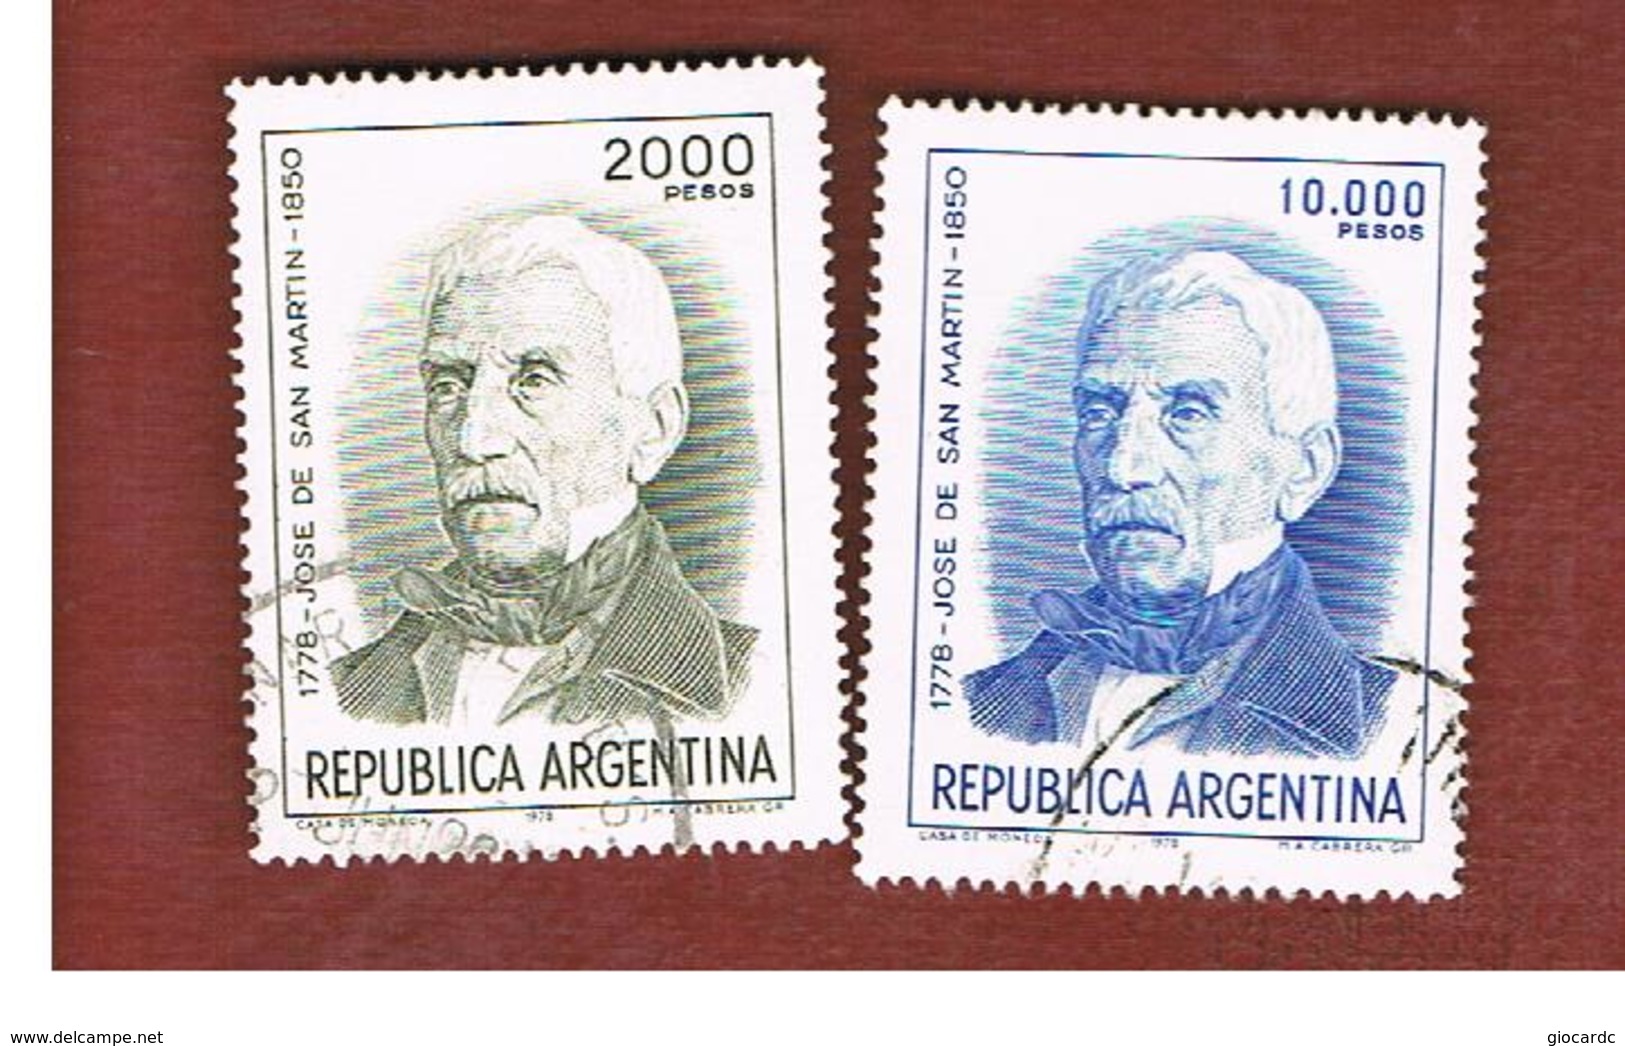 ARGENTINA - SG 1600.1600a  - 1978  BICENTENARY SAN MARTIN (COMPLET SET OF 2)     -   USED ° - Usati